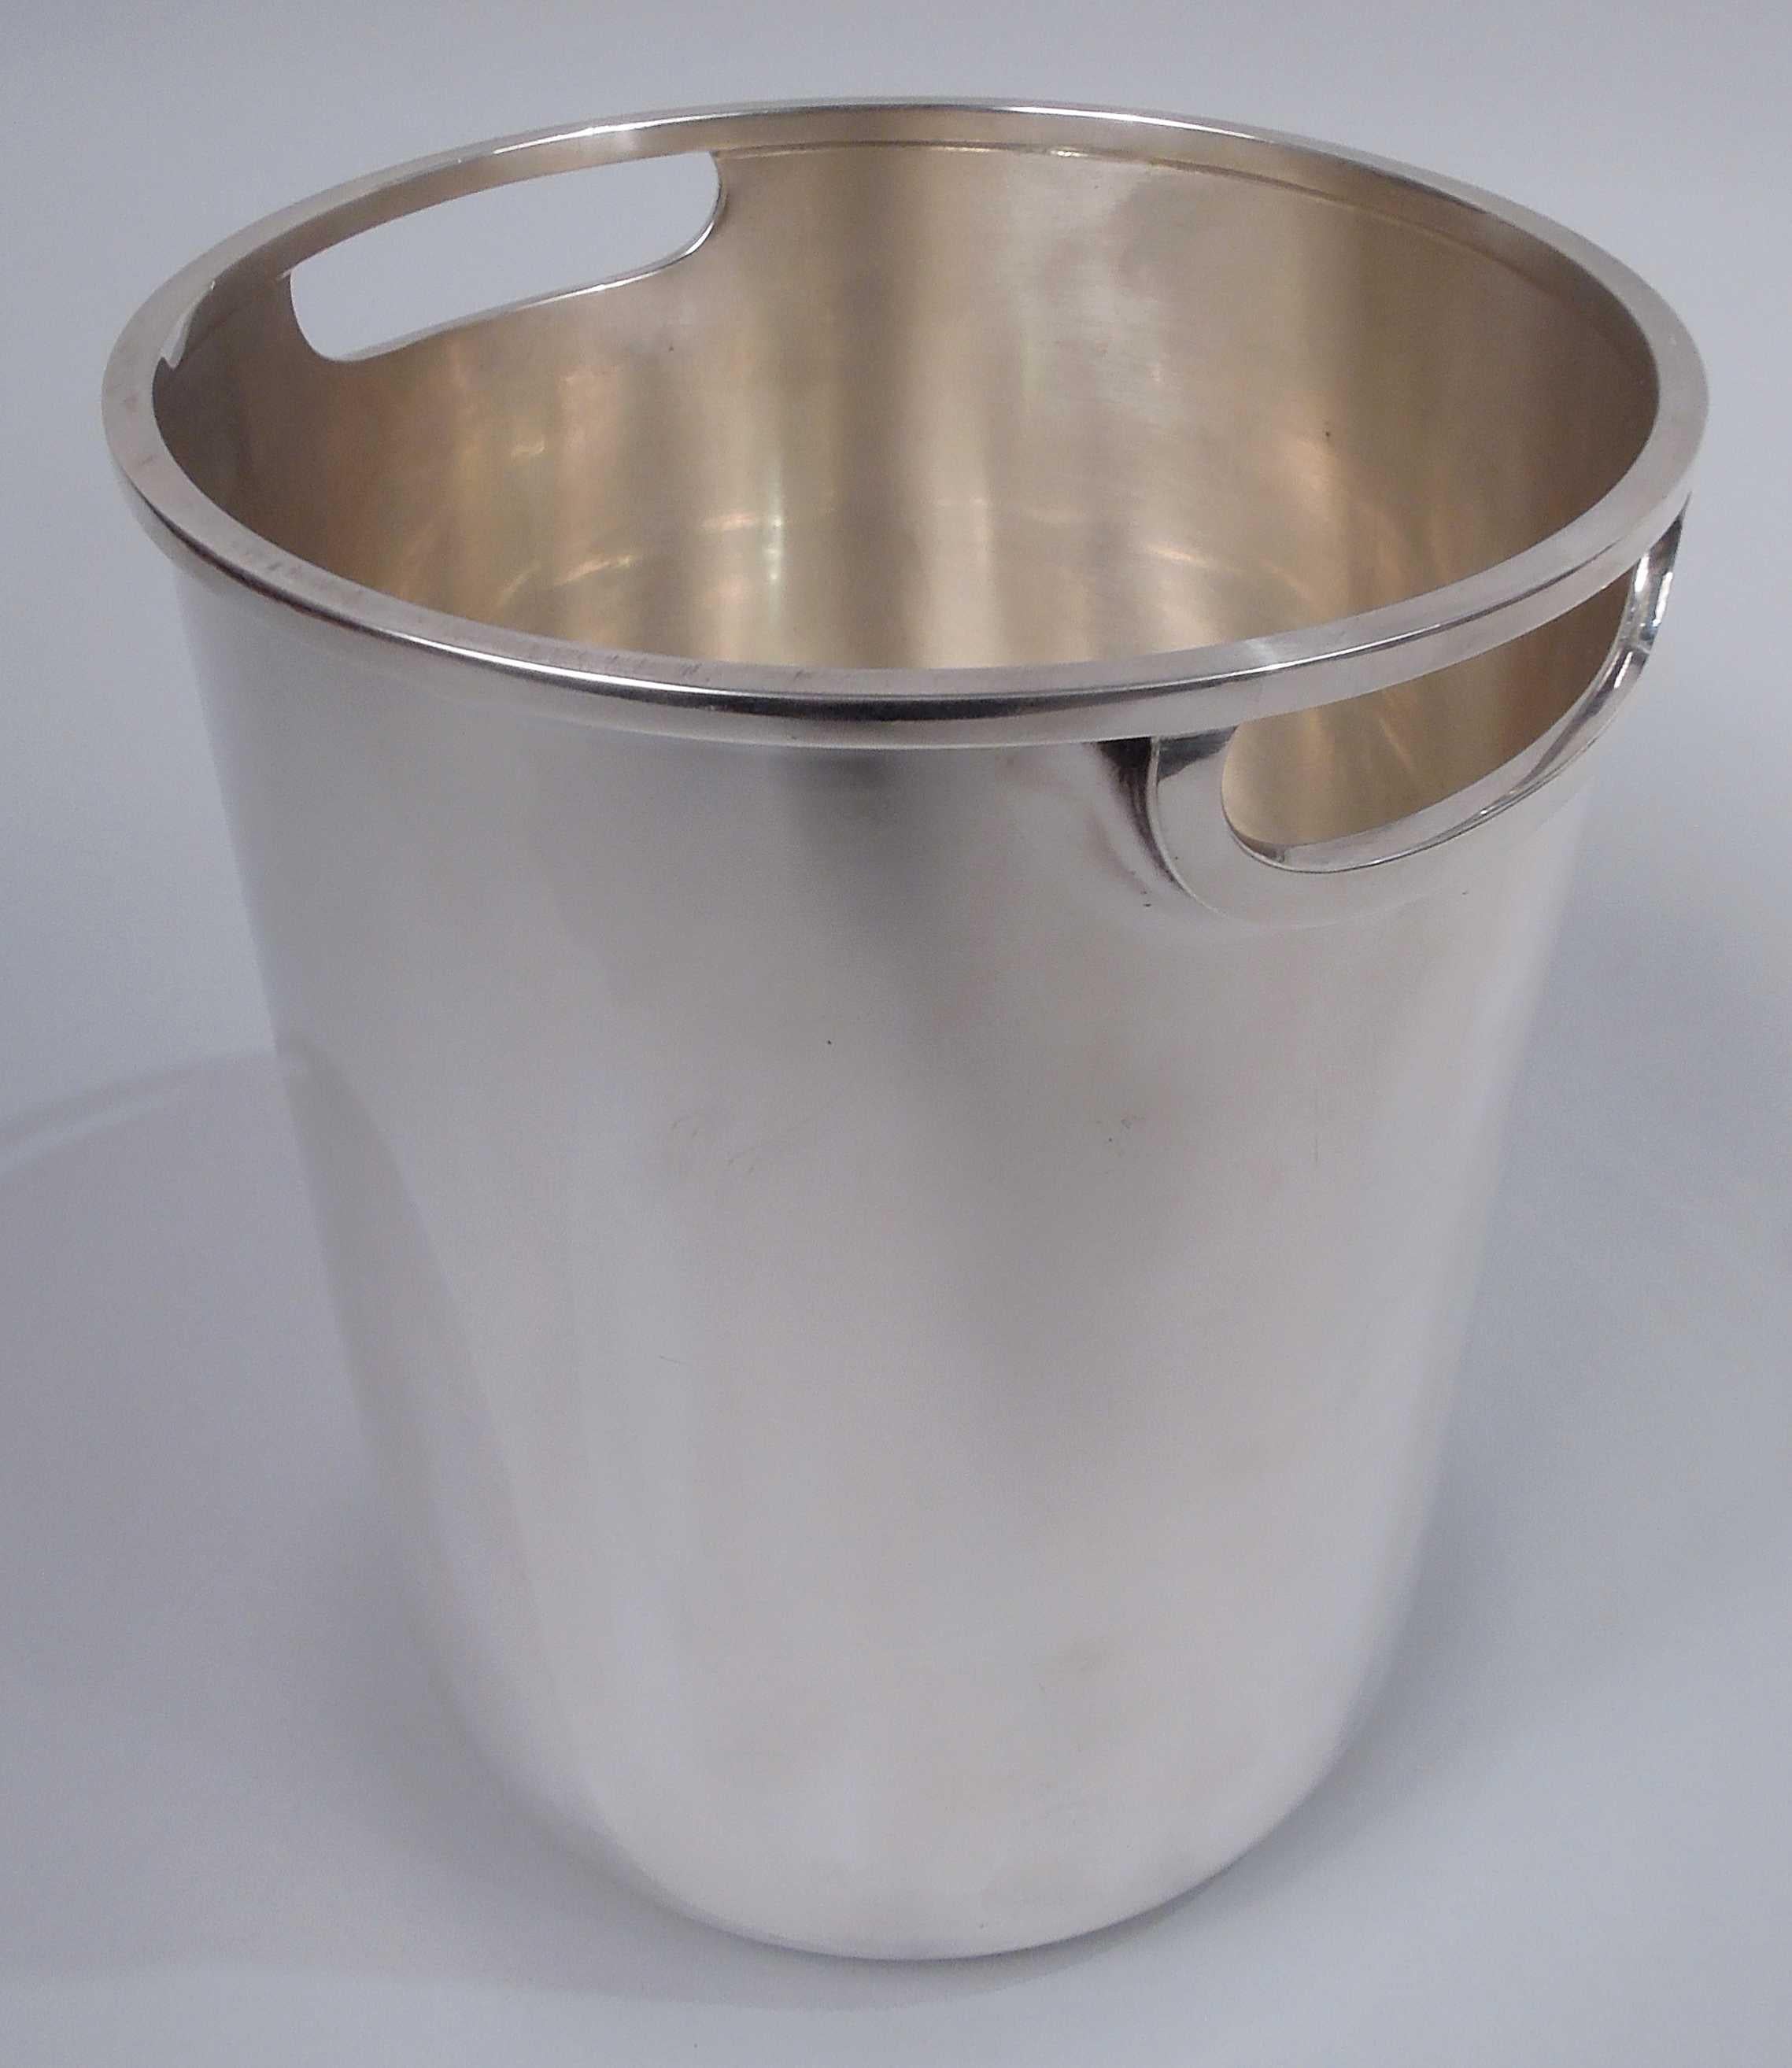 Midcentury Modern sterling silver wine cooler. Round with straight sides and curved bottom. Cutout lunette side handles have rectilinear molding as does mouth rim. Sleek and capacious. Marked “Tiffany & Co. / Sterling Silver”. Heavy weight: 48.3